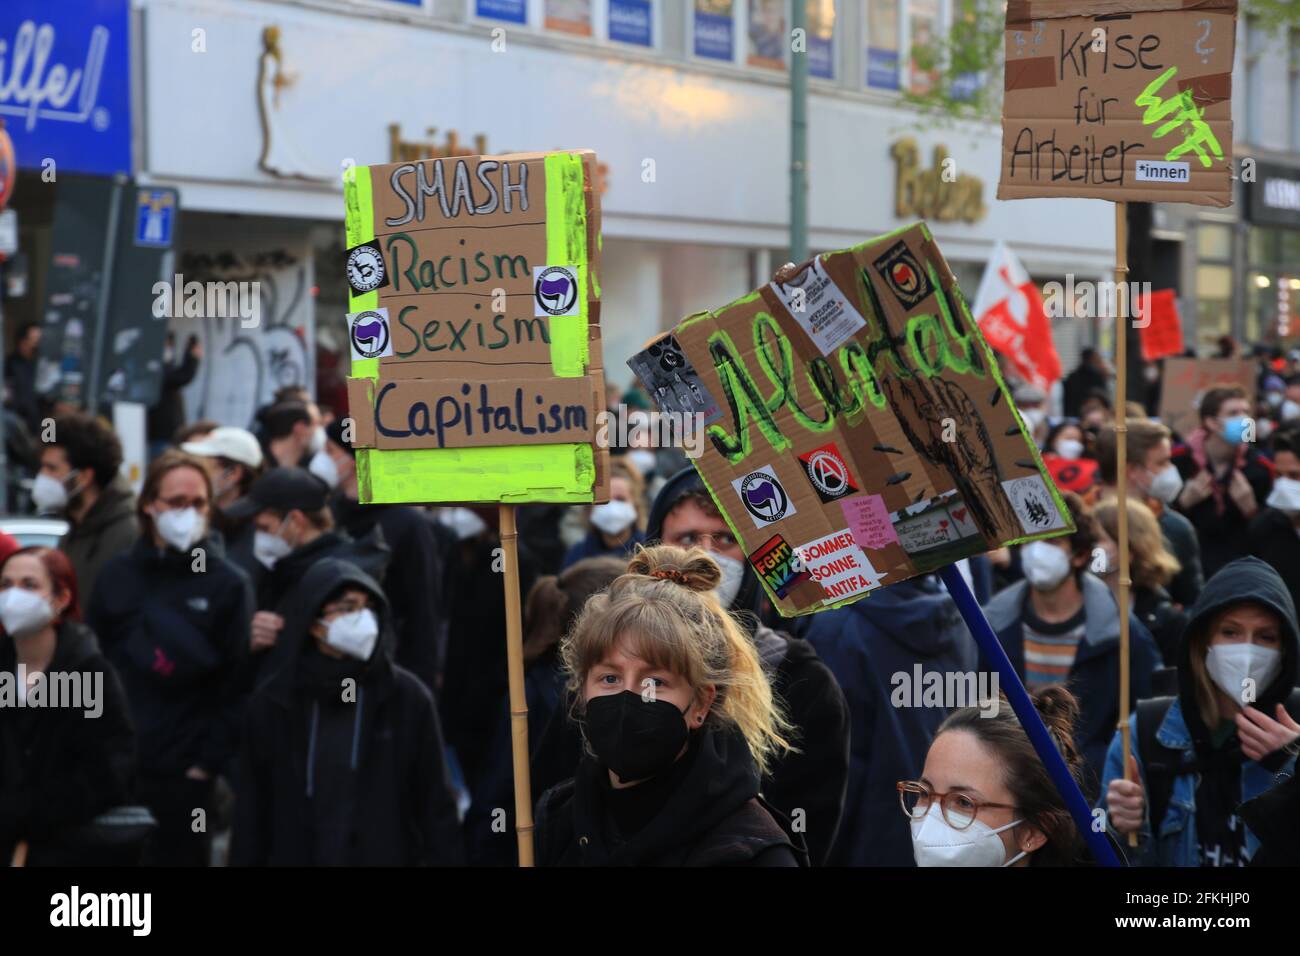 Berlin, Germany - May 01, 2021: A protester holding a placecard saying 'Smash Racism Sexism Capitalism' 1st May Demonstrations on the streets of Berli Stock Photo